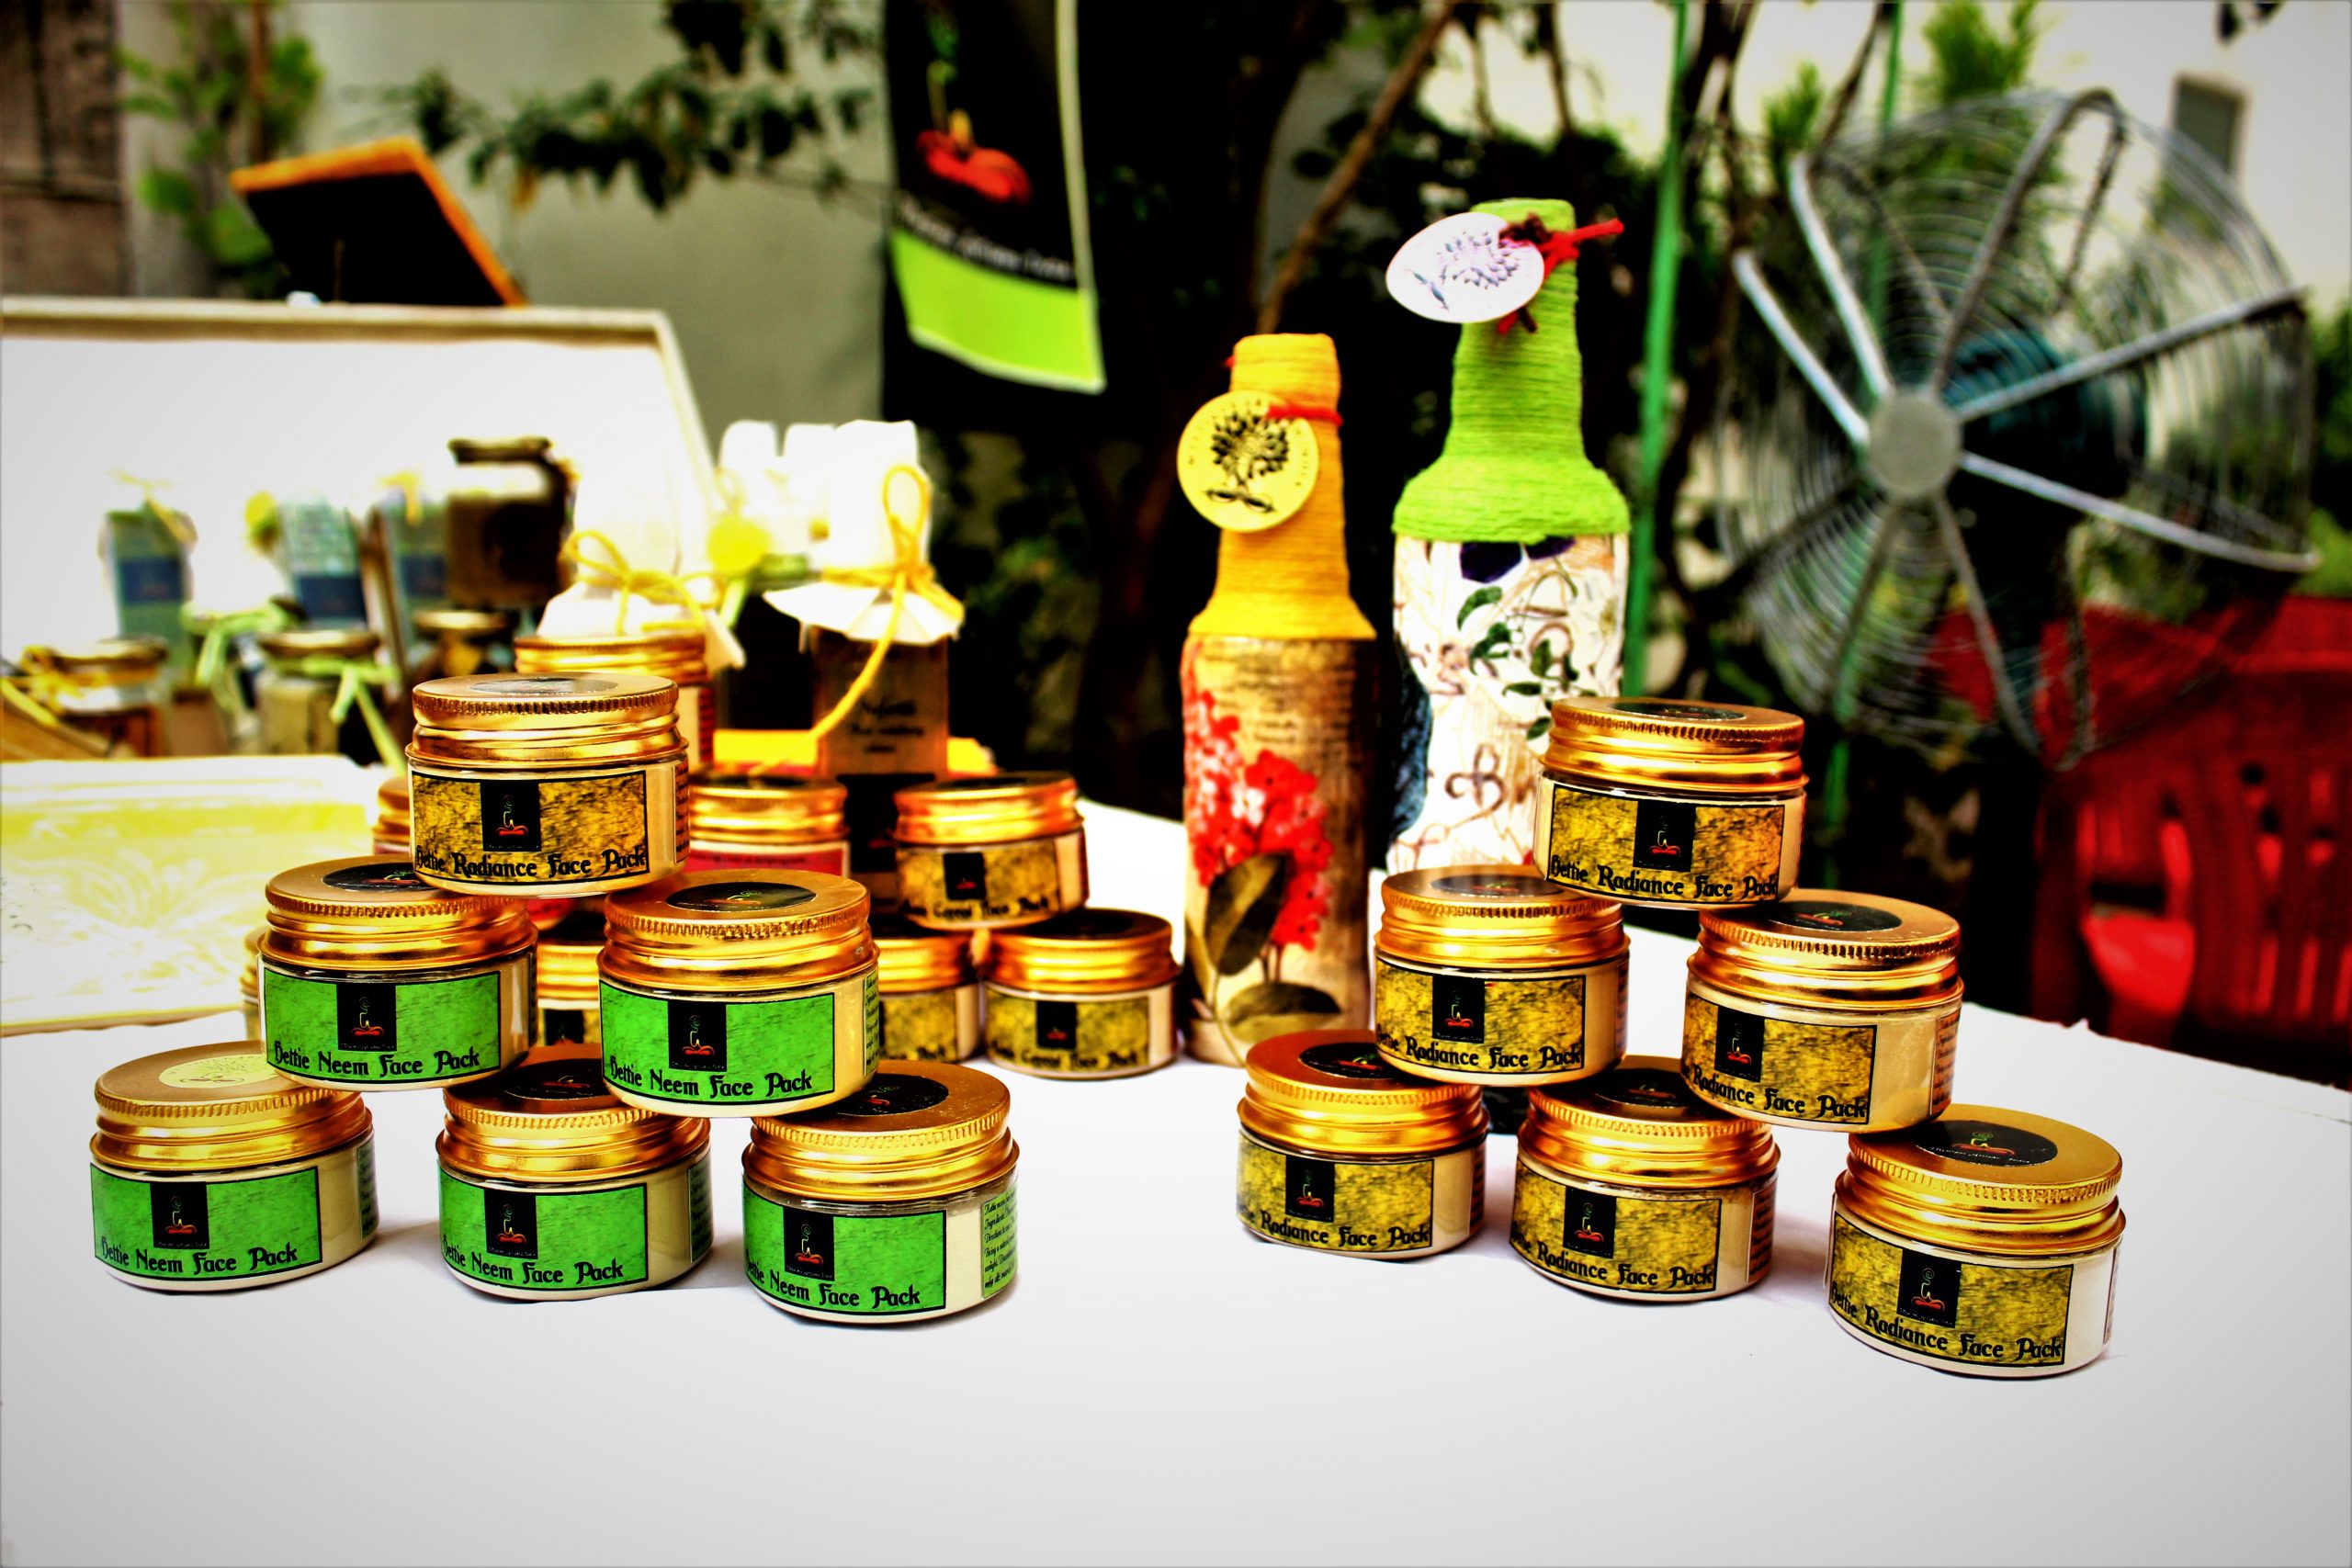 Herbal Beauty products